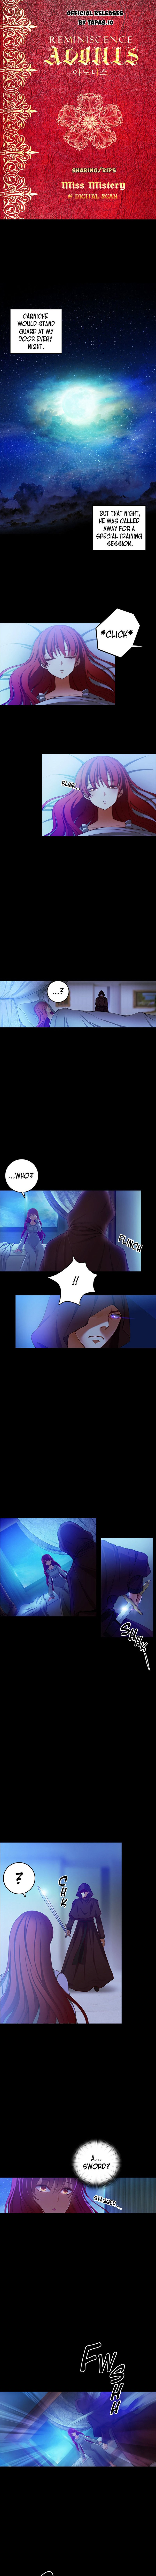 Reminiscence Adonis Chapter 9 - Page 0